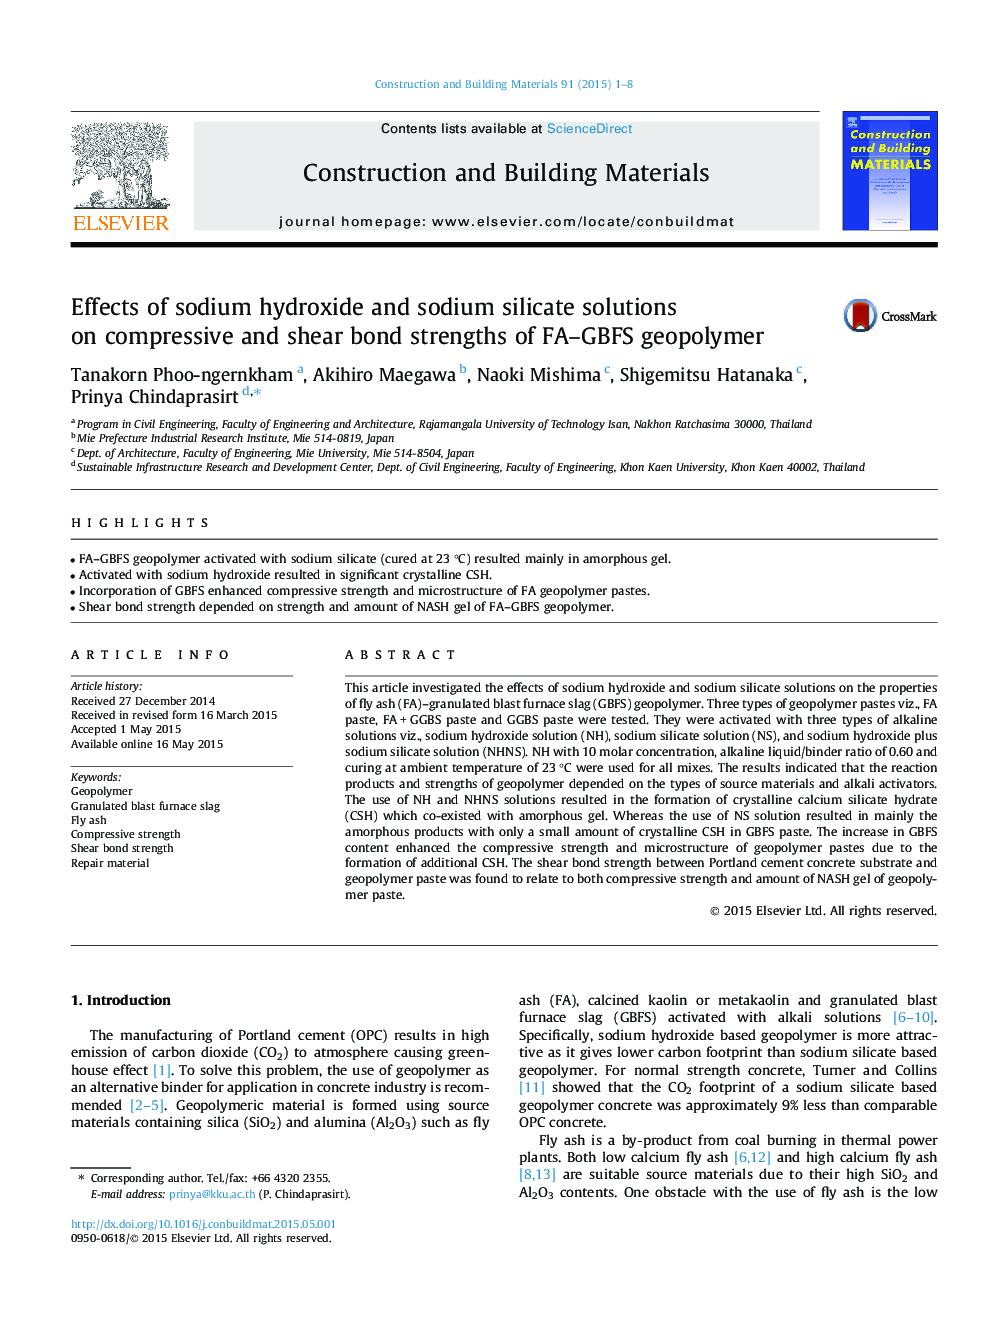 Effects of sodium hydroxide and sodium silicate solutions on compressive and shear bond strengths of FA–GBFS geopolymer